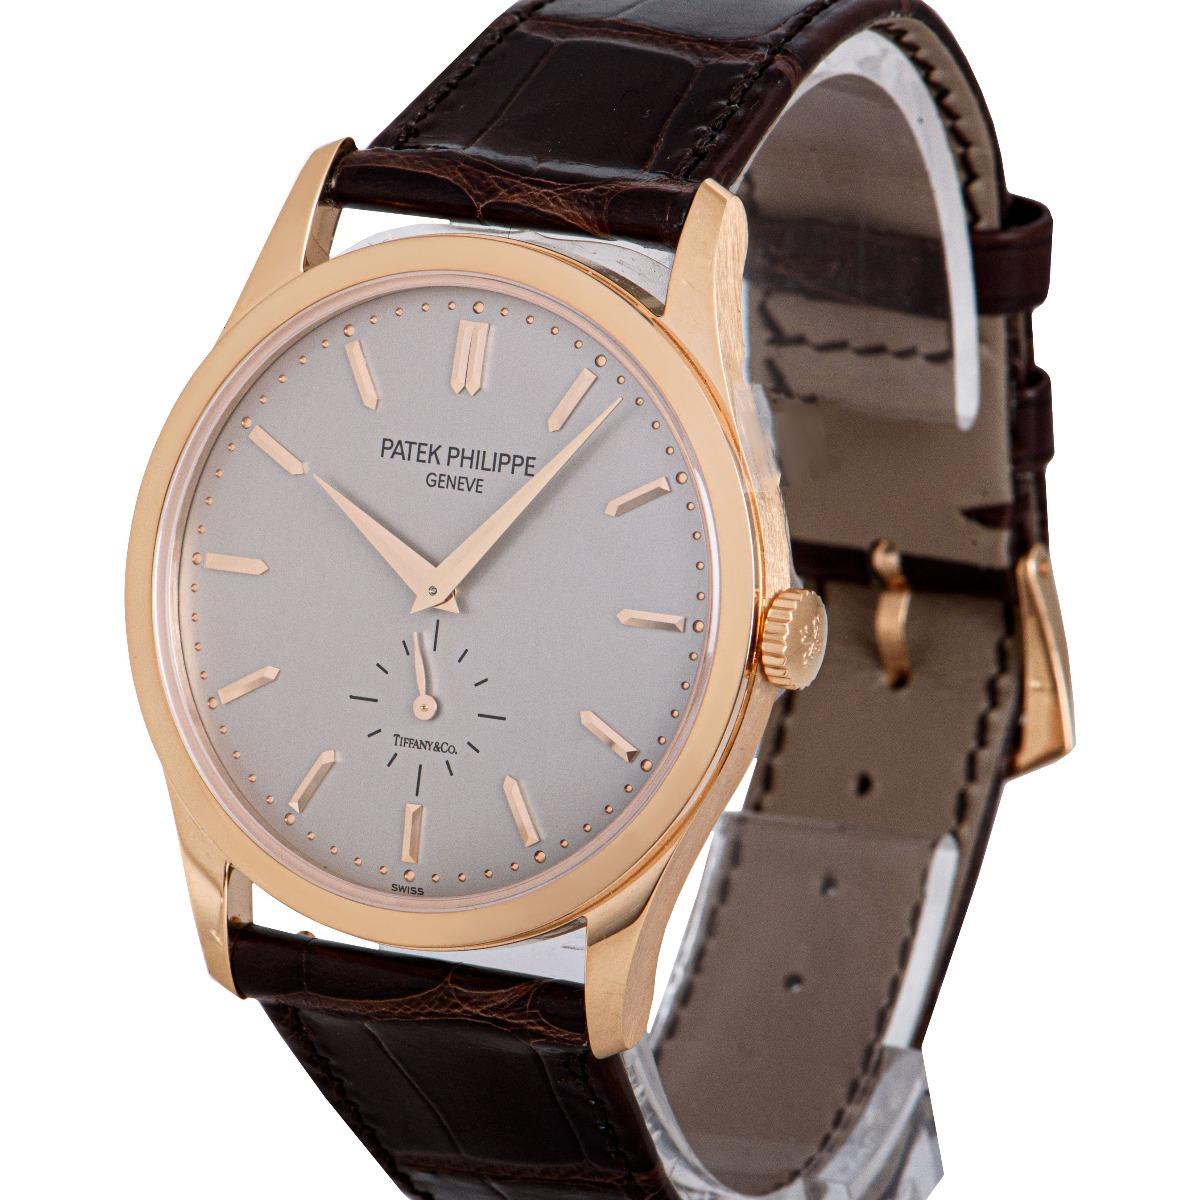 An Unworn 18k Rose Gold 37mm Calatrava Men's Wristwatch, double name Tiffany & Co. silvery gray dial with applied hour markers, small seconds at 60'clock, a fixed 18k rose gold bezel, an original chocolate brown leather strap with an original 18k